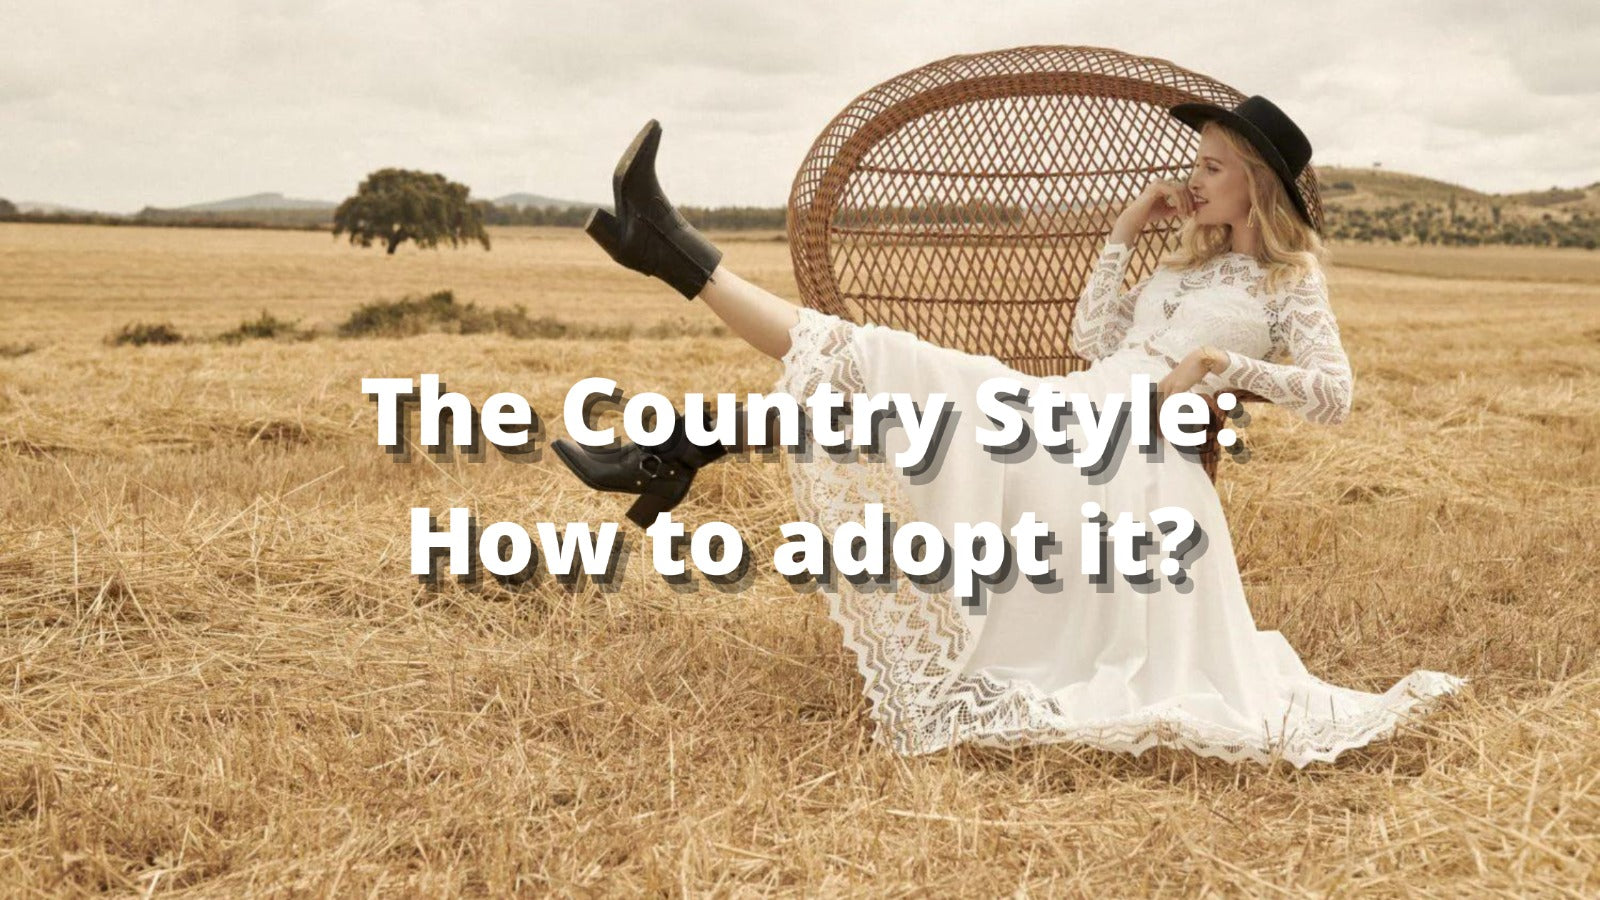 The Country Style: How to adopt it?